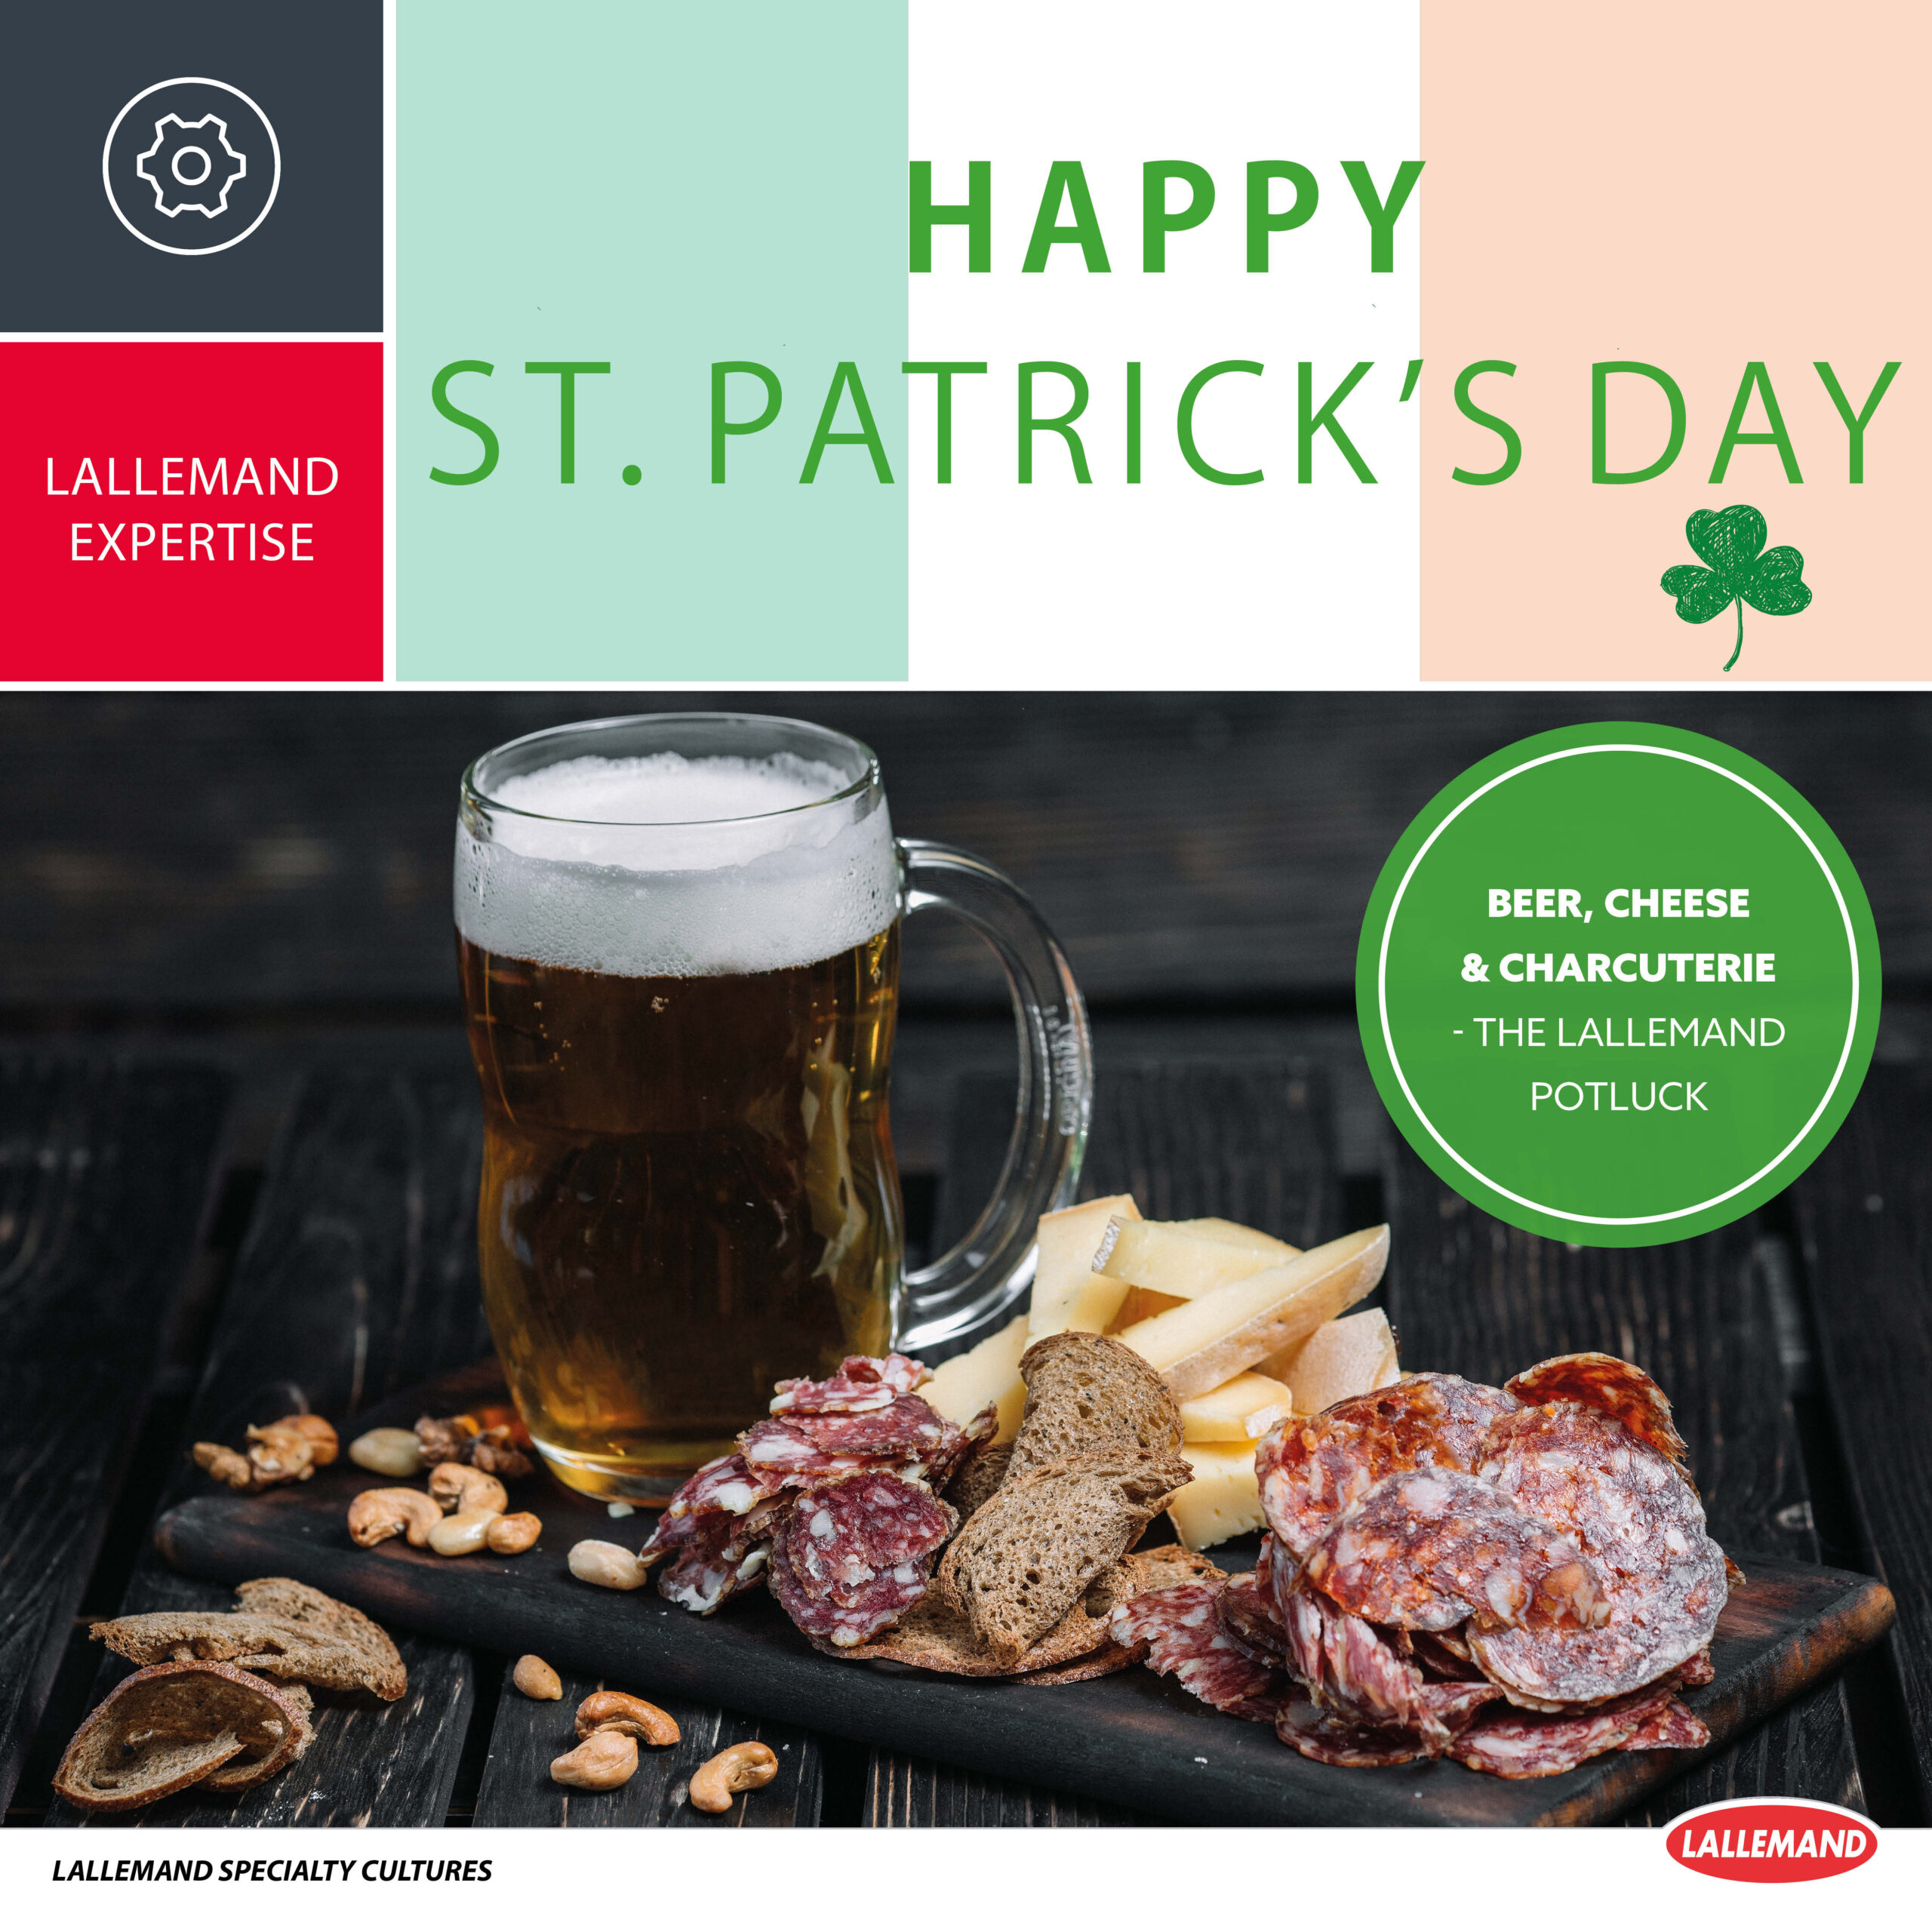 St. Patrick’s Day at Lallemand